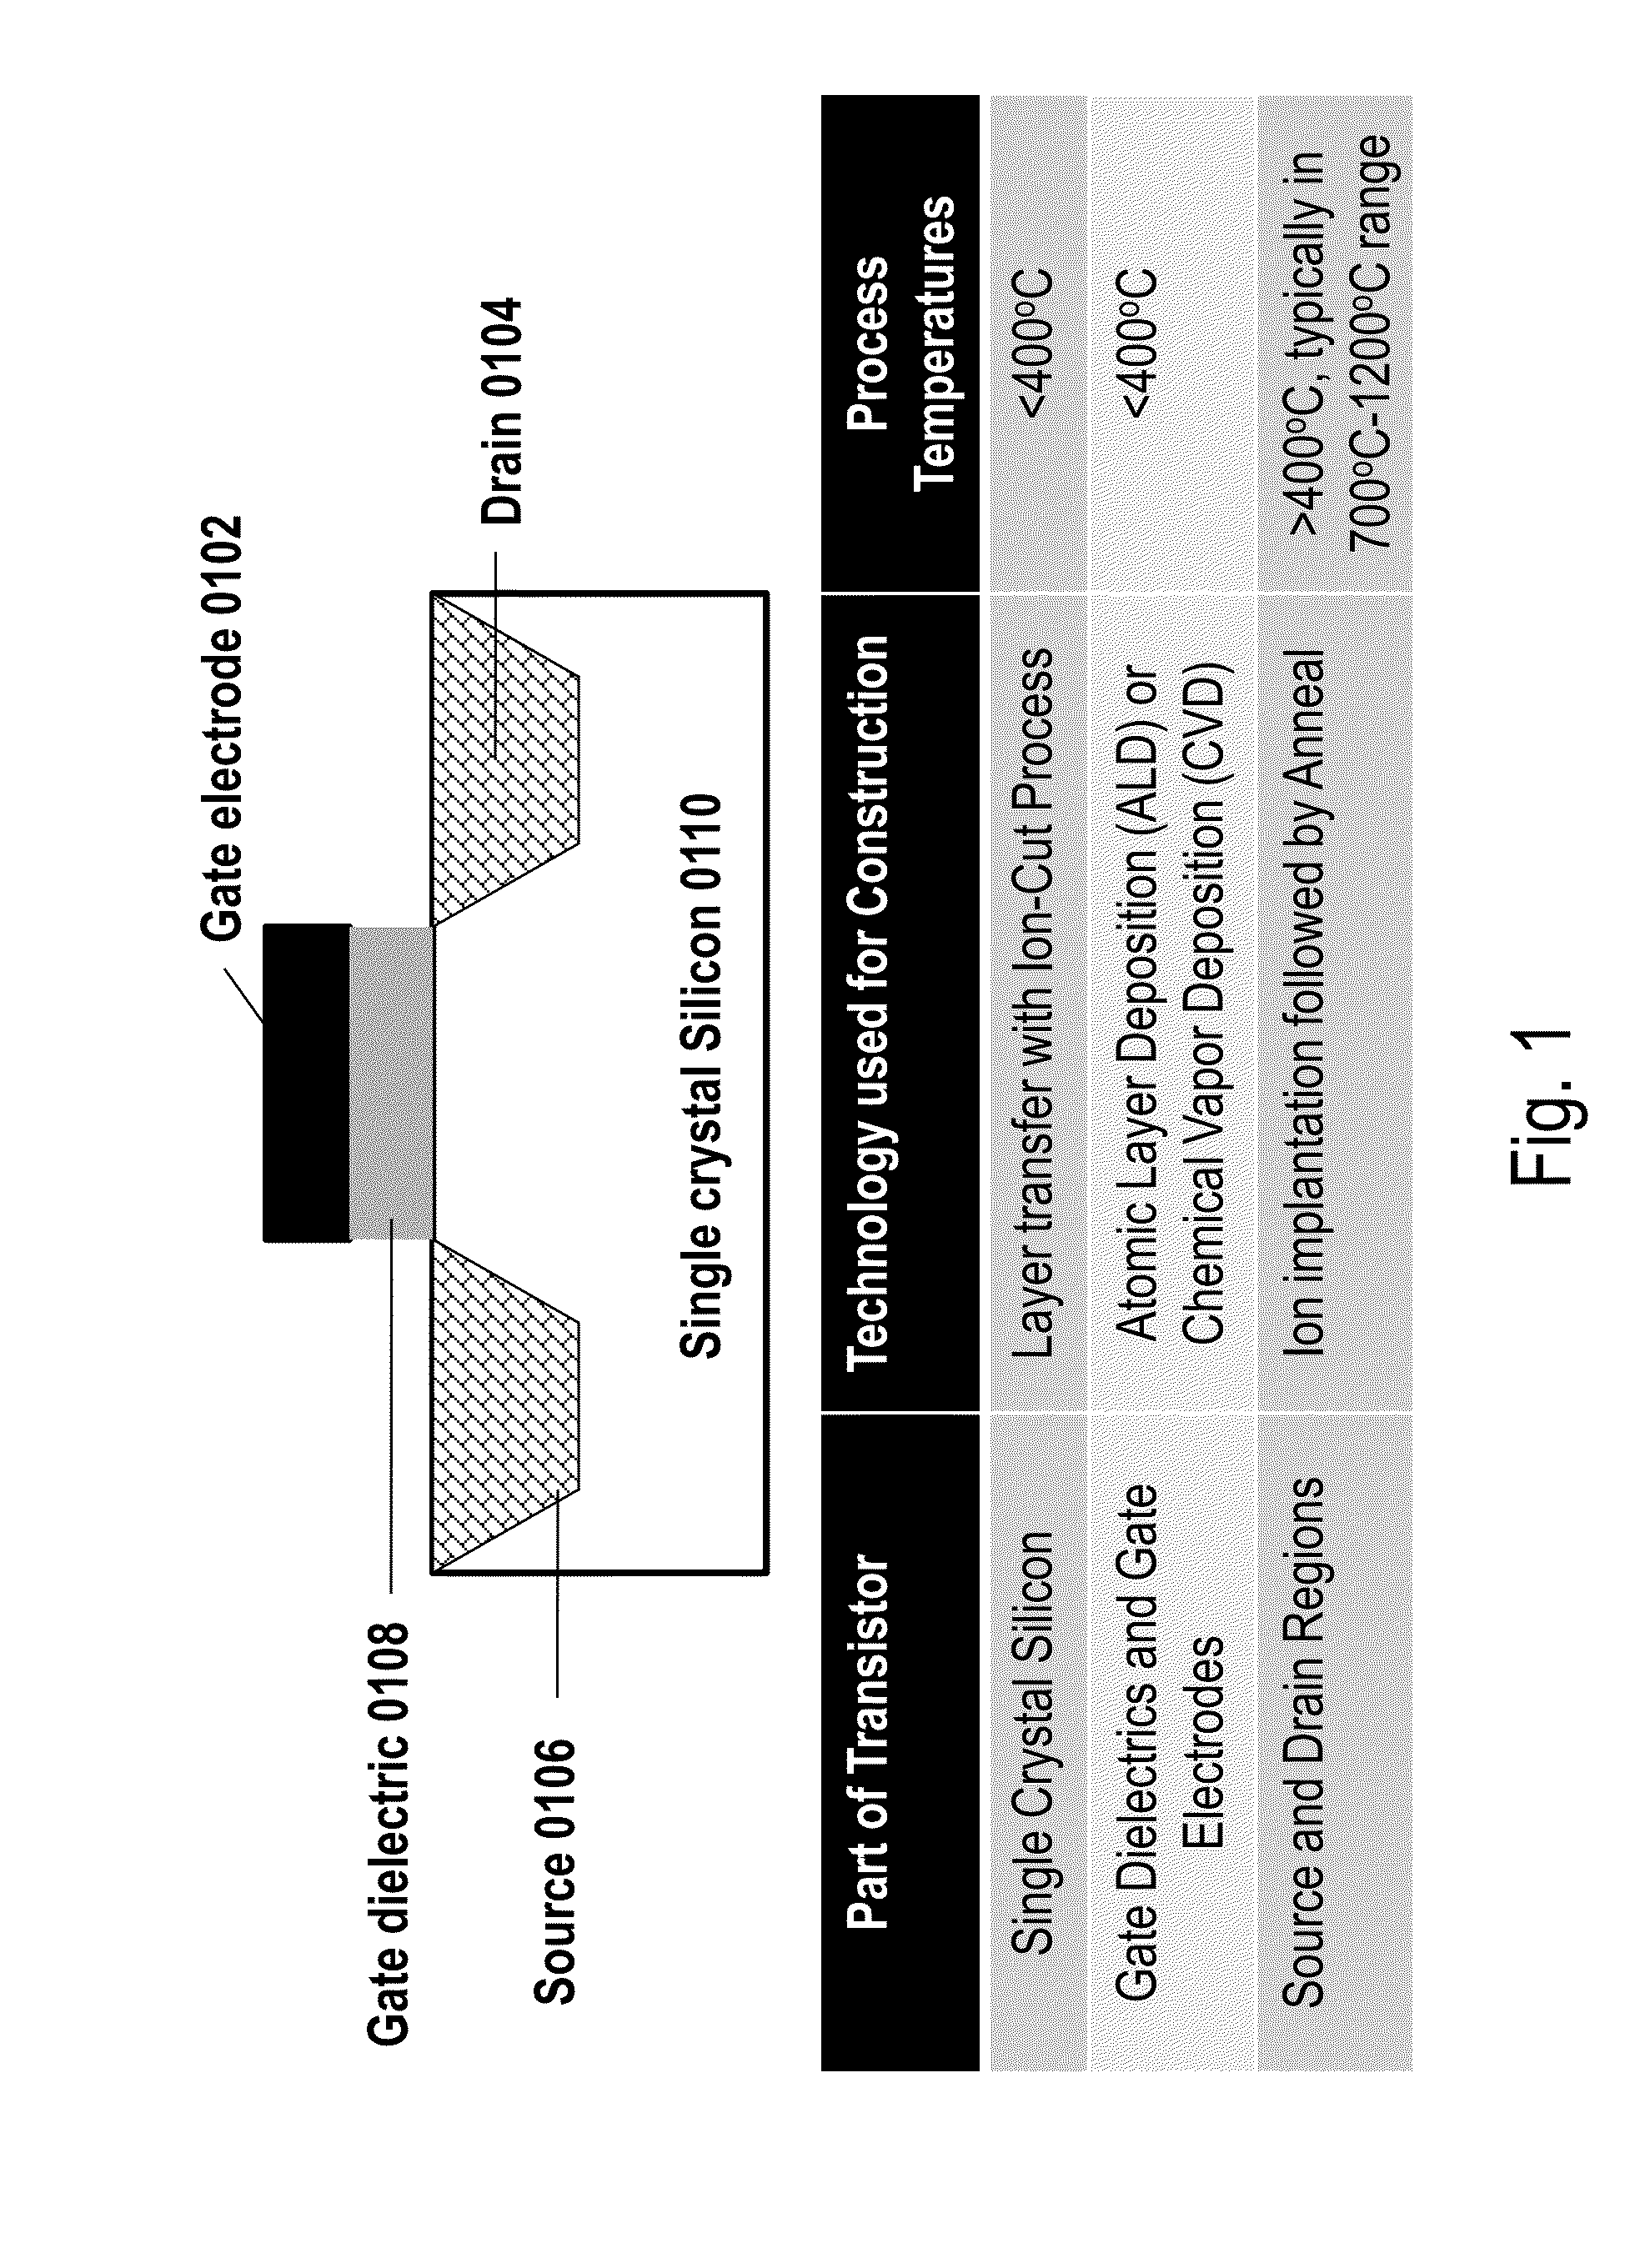 3D memory semiconductor device and structure